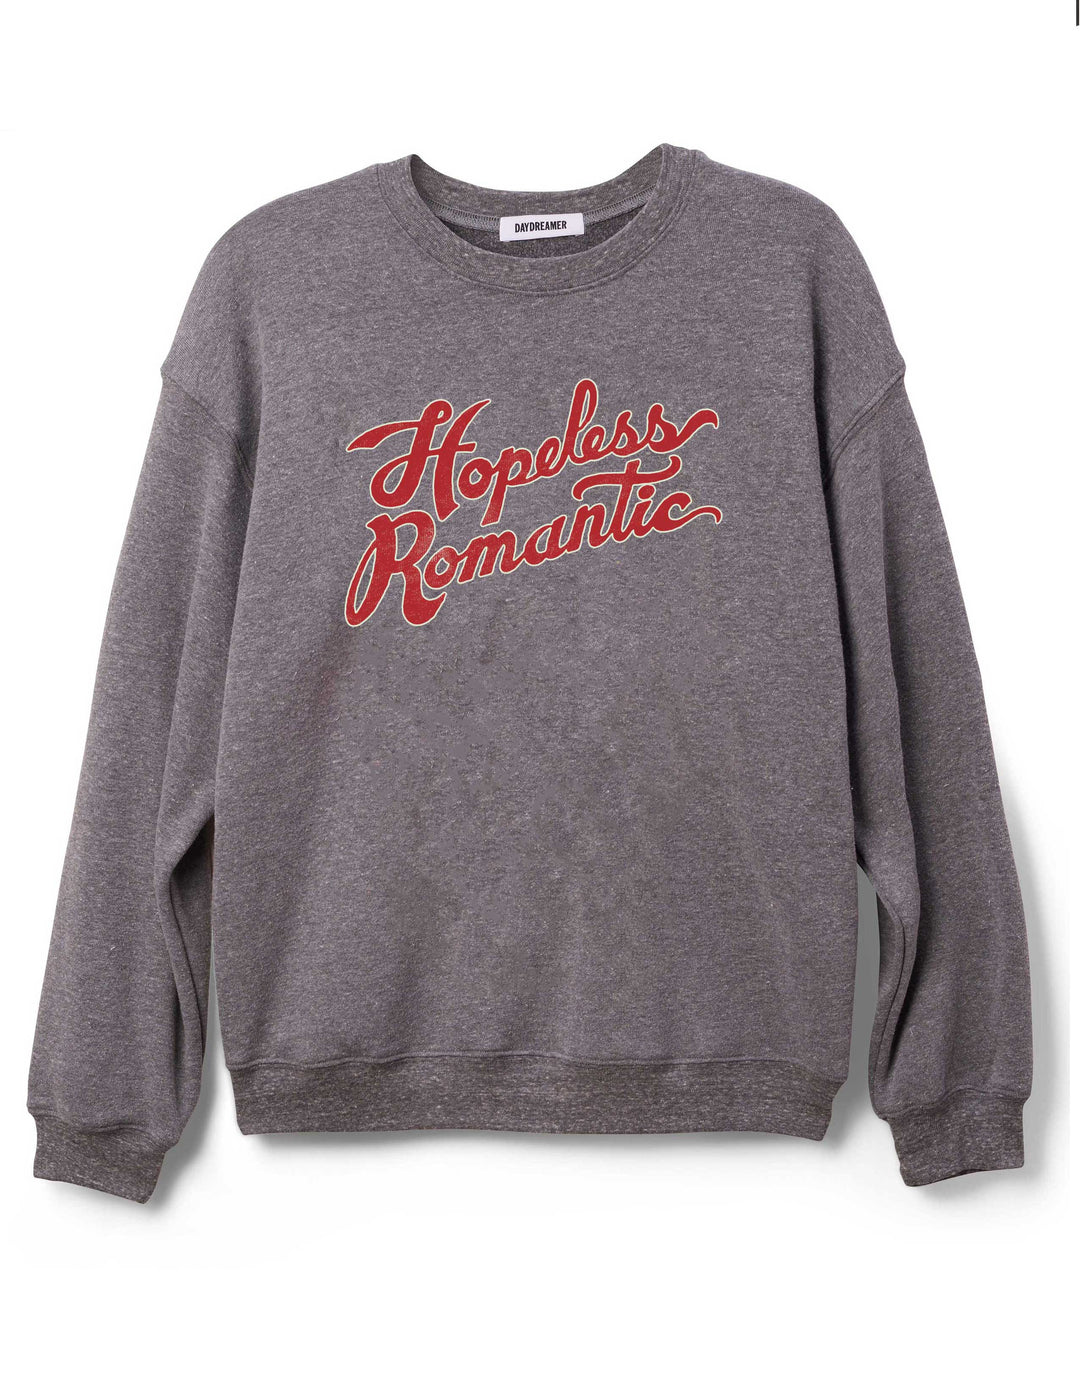 HOPELESS ROMANTIC BF CREW-HEATHER GREY - Kingfisher Road - Online Boutique